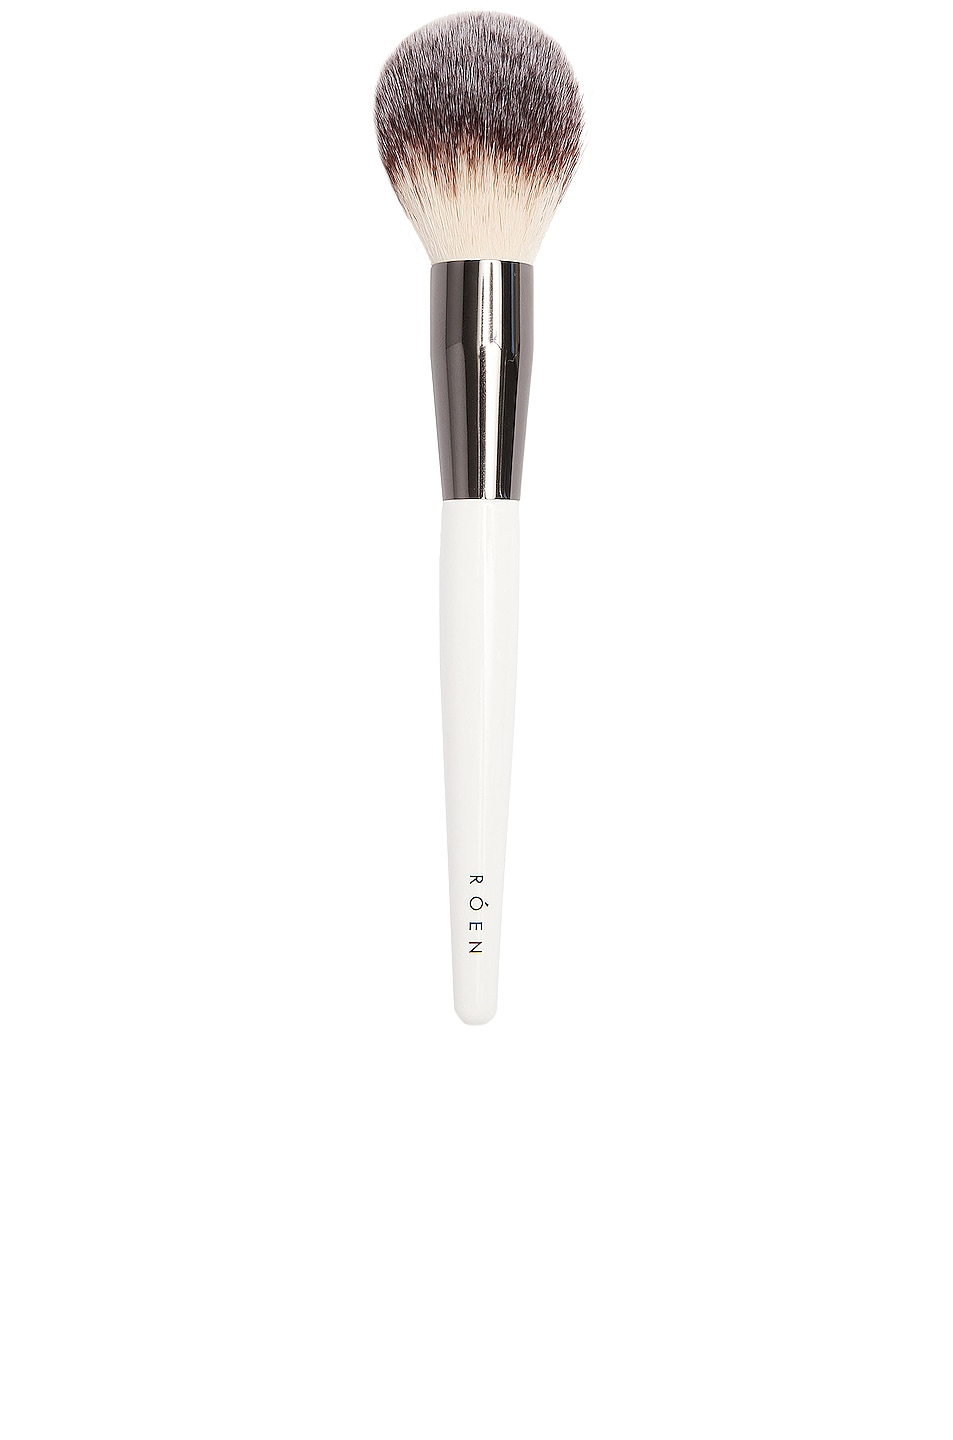 ROEN Everything Powder Brush in Beauty: NA